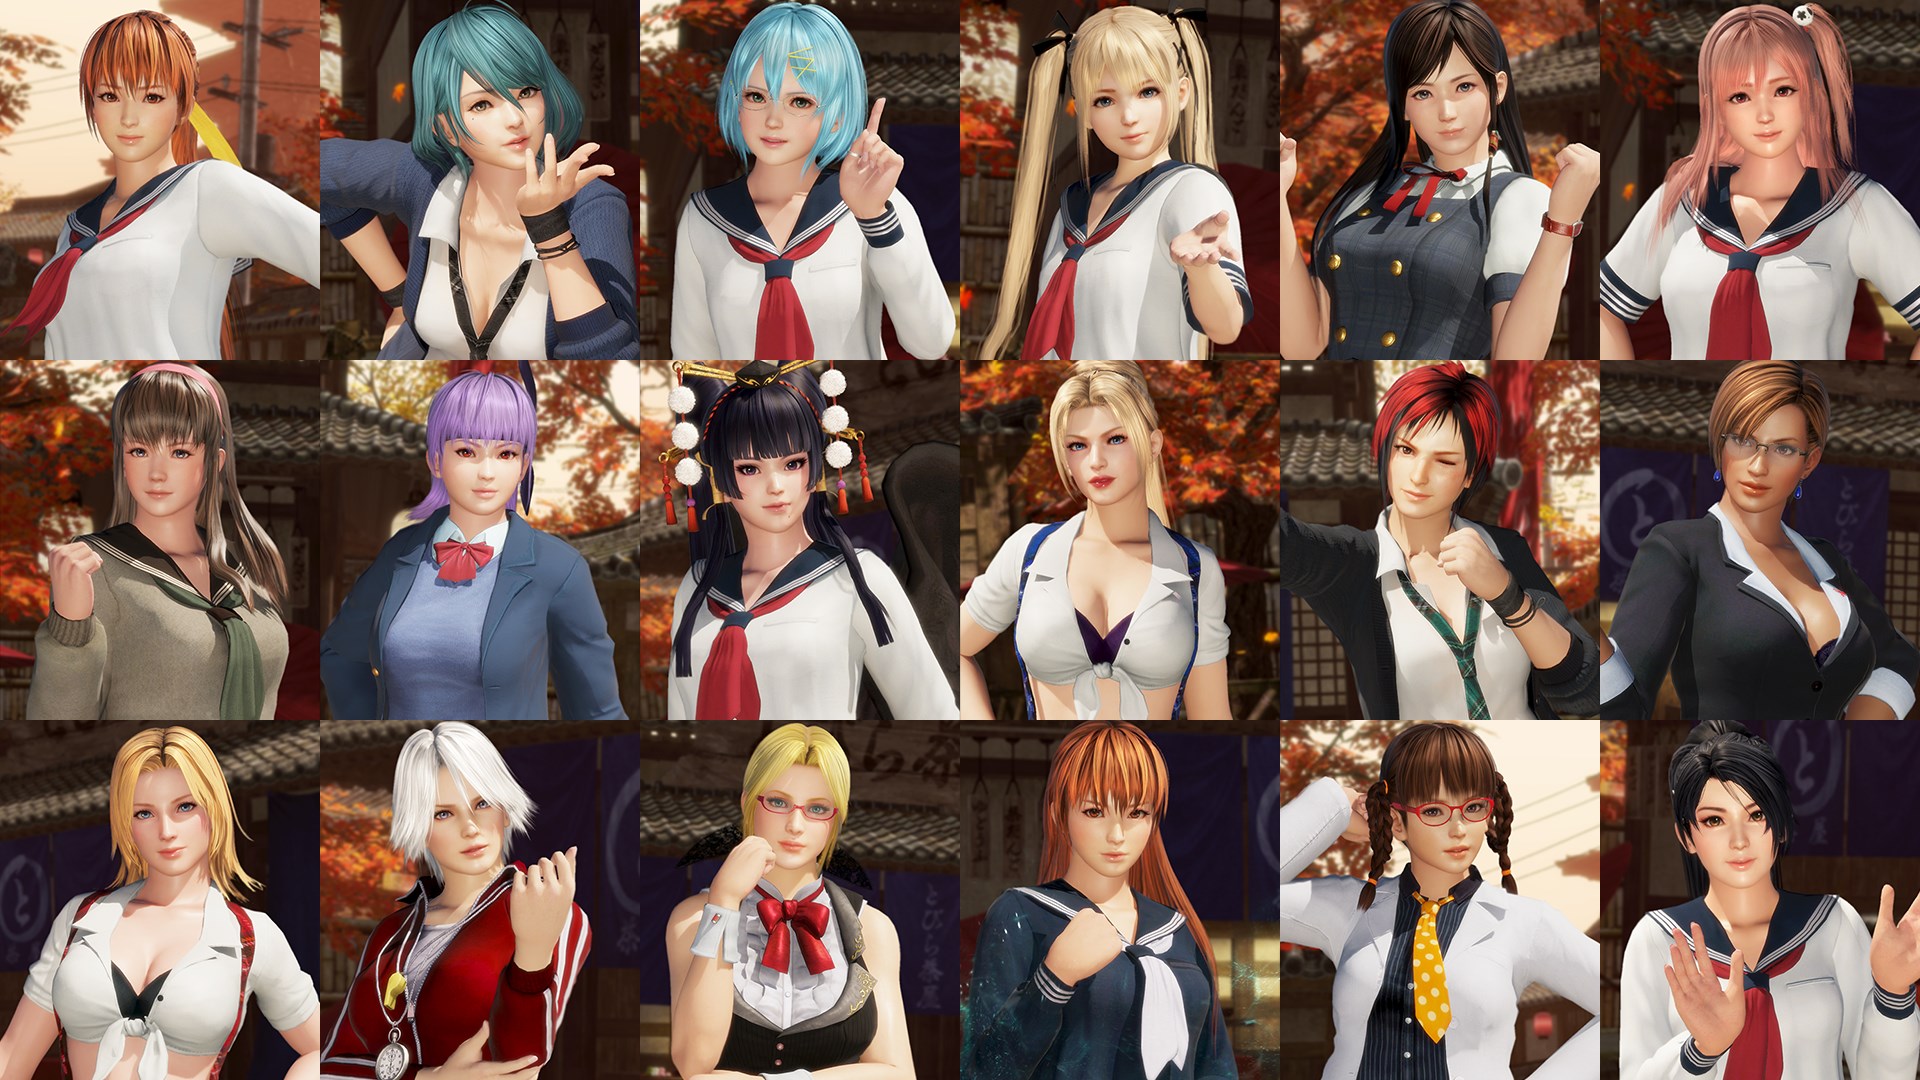 ᐈ Dead or Alive 6 – Characters • WePlay!